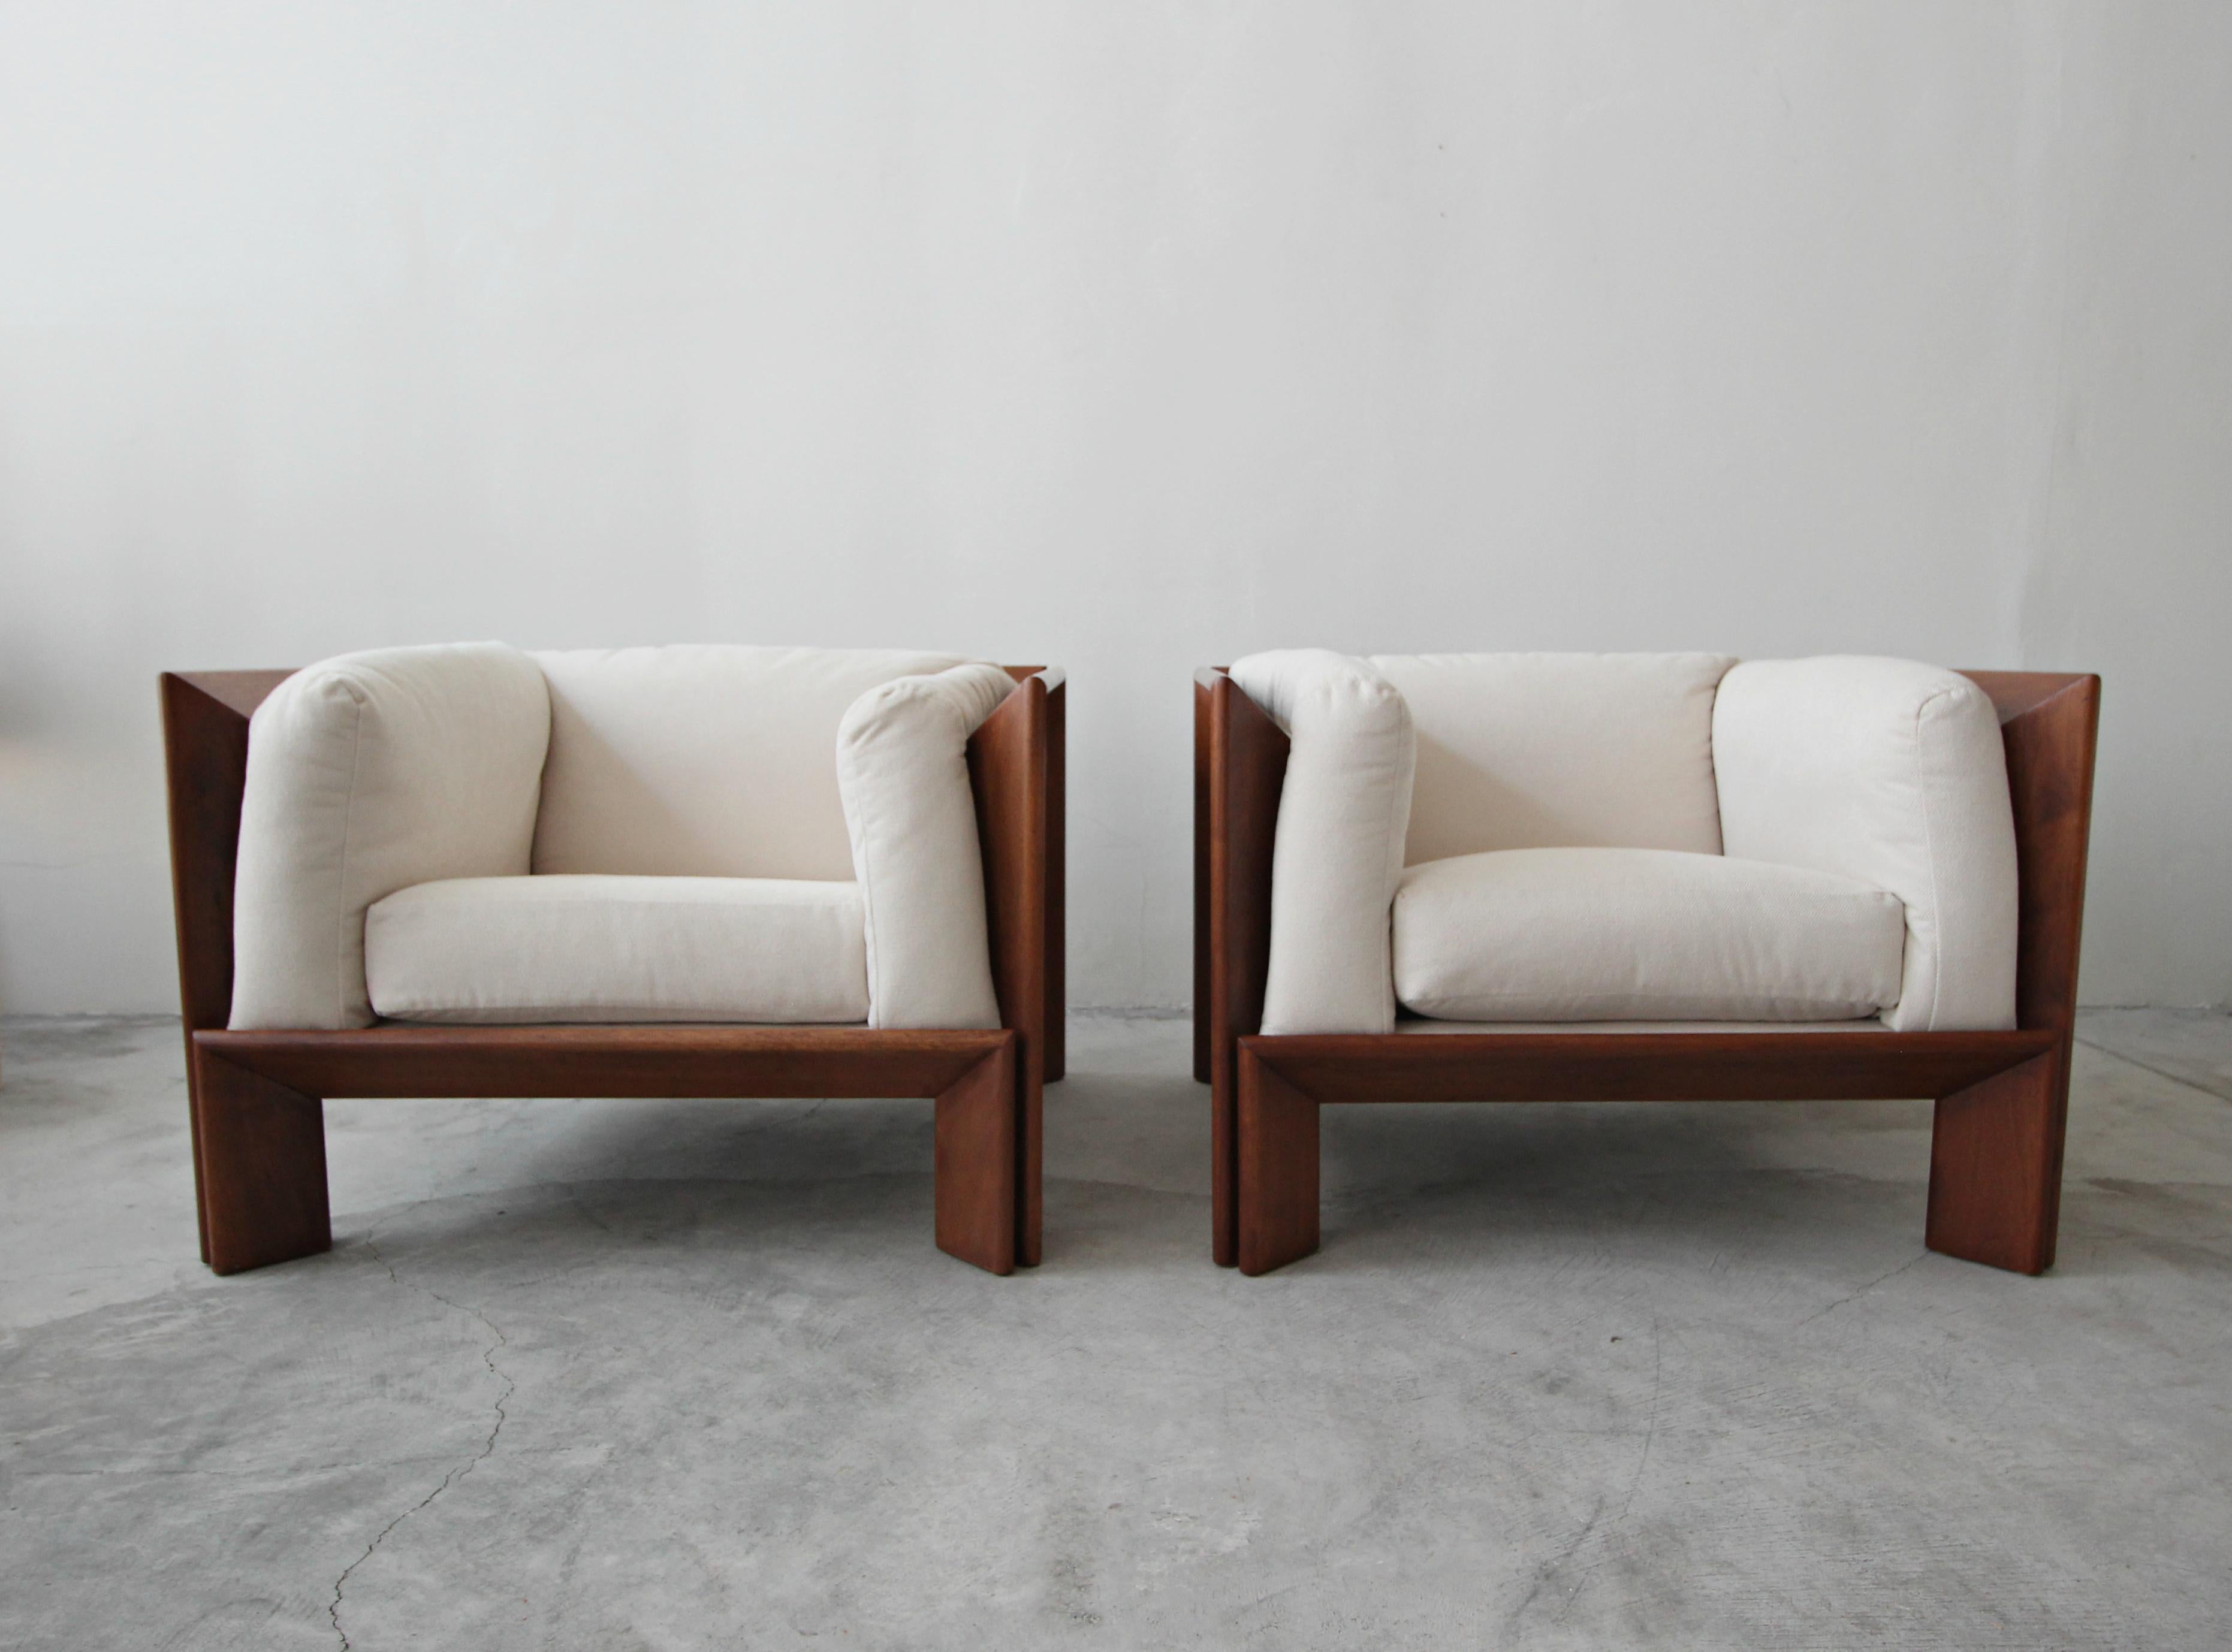 Super rare pair of oversized, angular, solid walnut lounge chairs. These chairs are like no others, simple but so complex. The lines created by their solid walnut frames make these two furniture masterpieces. These chairs feature a cozy seating area